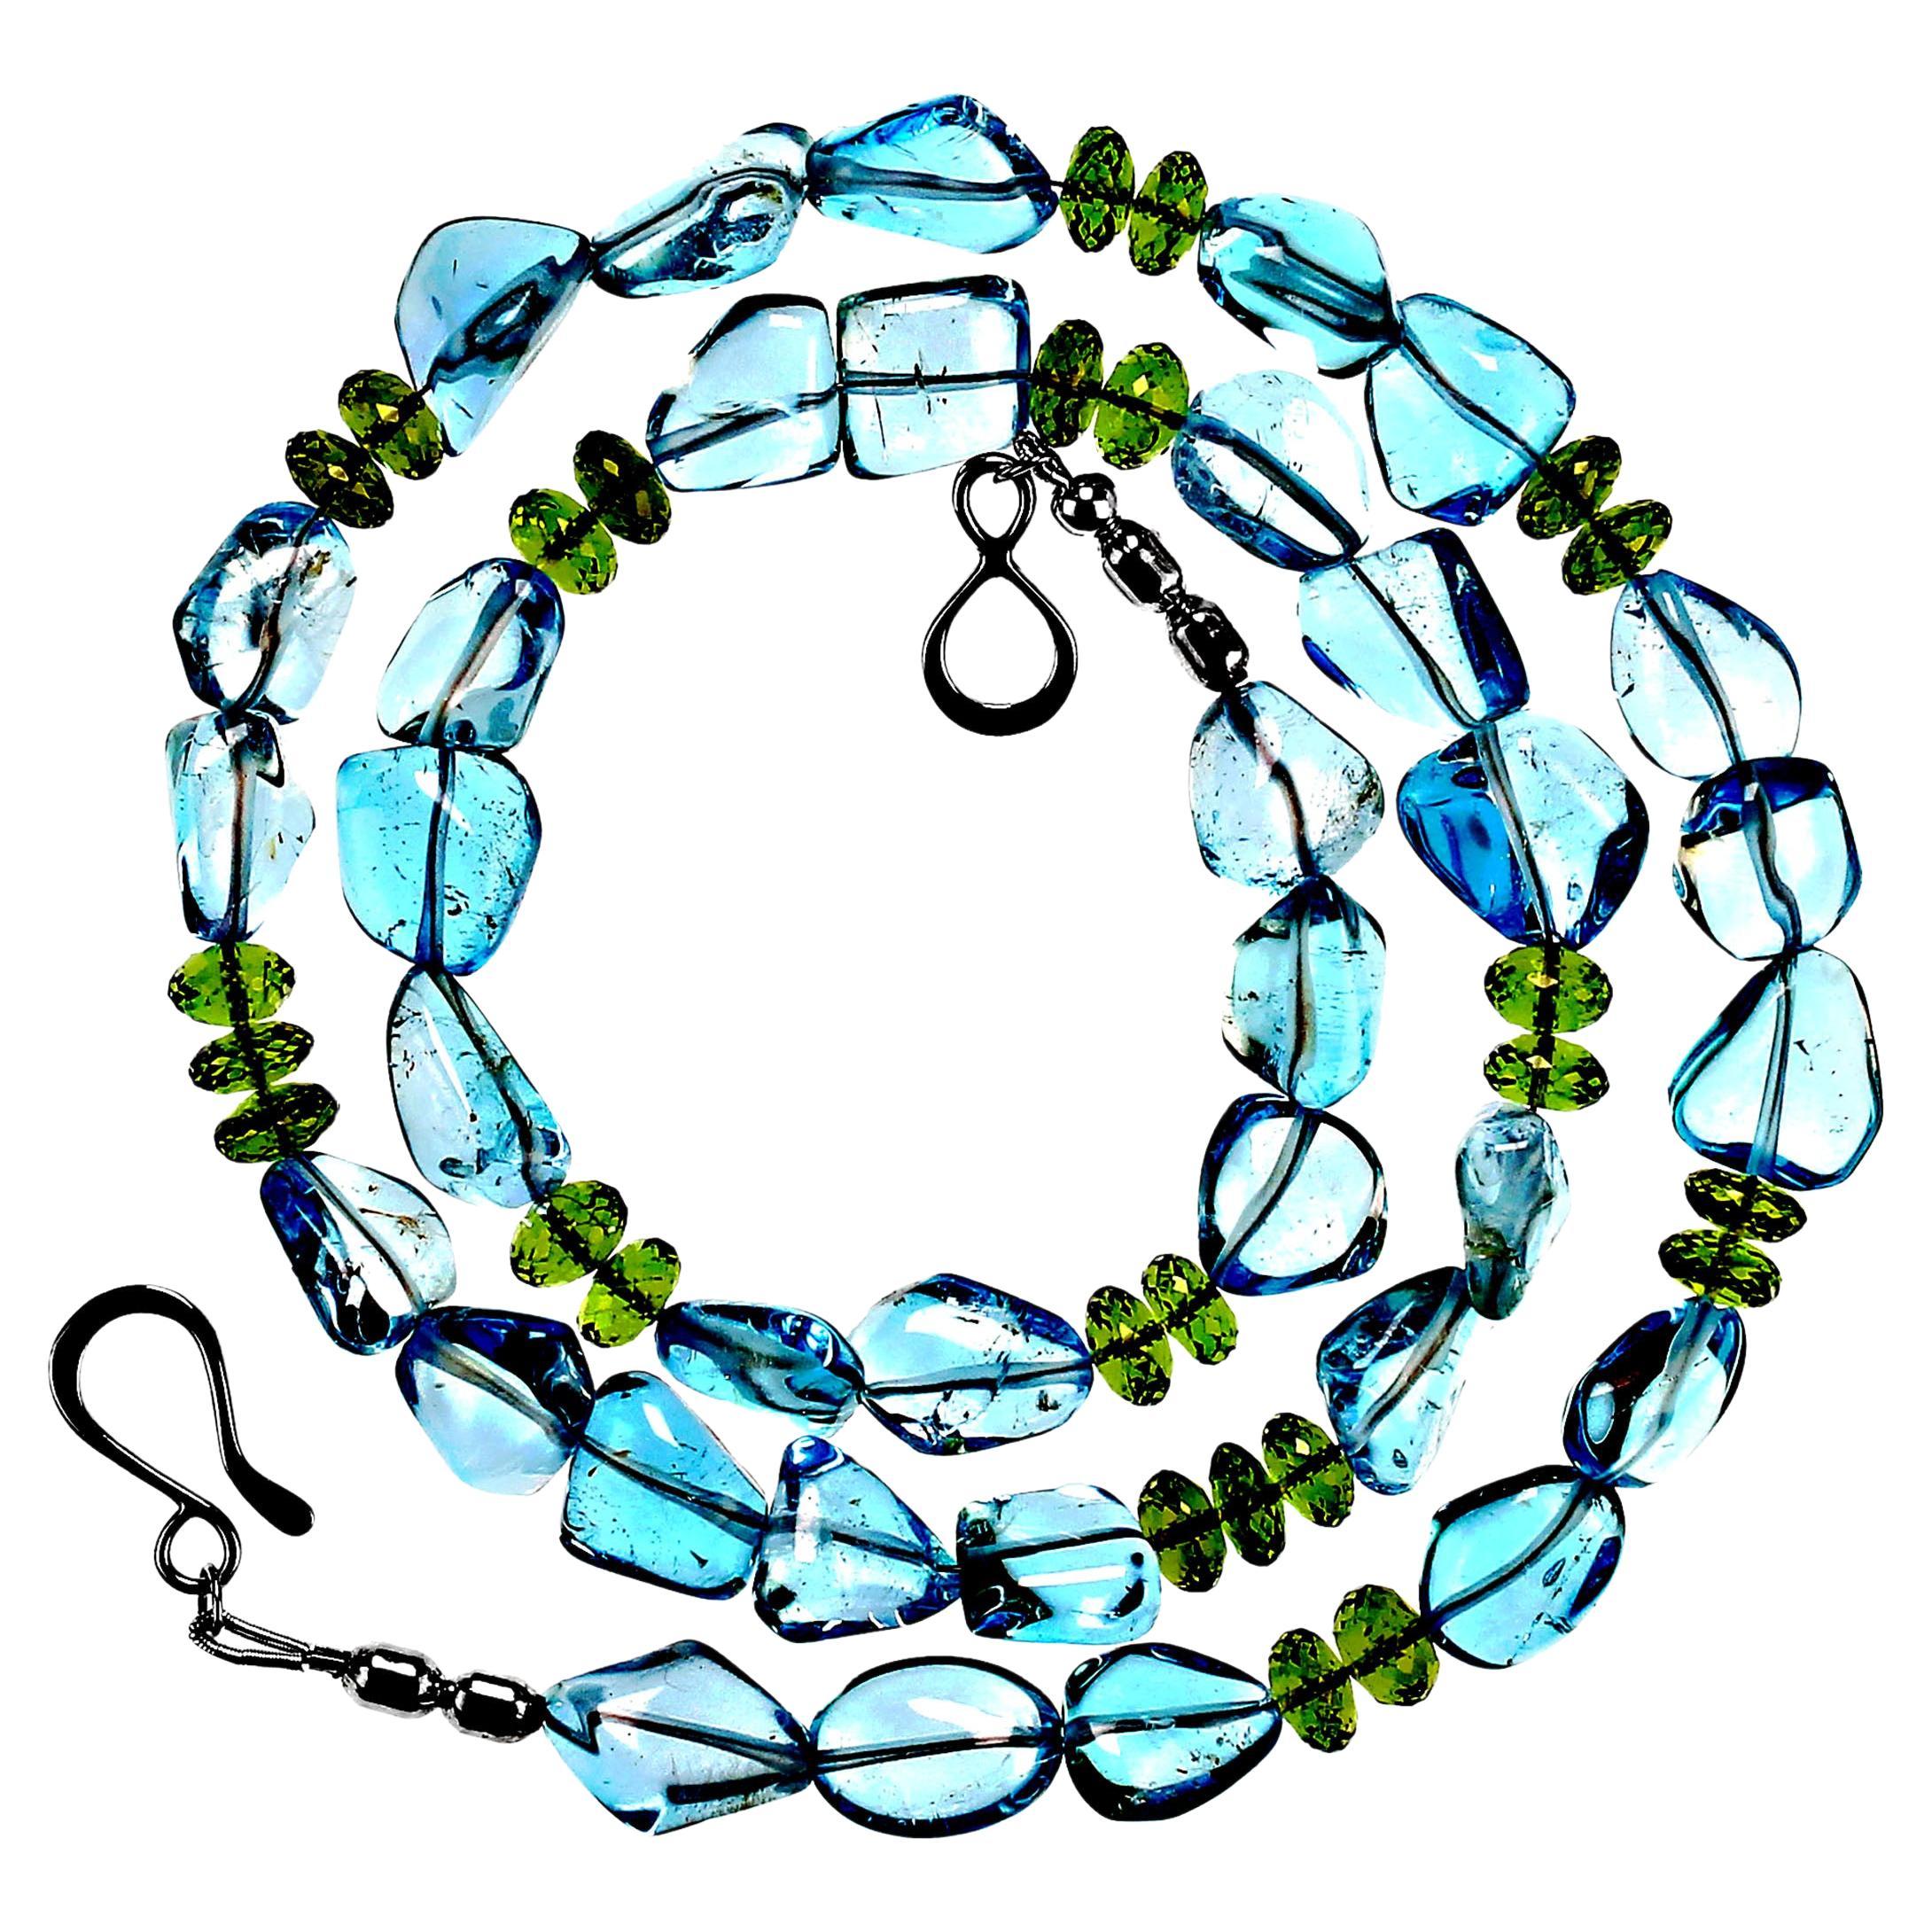 Artisan AJD Elegant & Unique Blue Topaz & Peridot 23 Inch necklace  Great Gift! For Sale